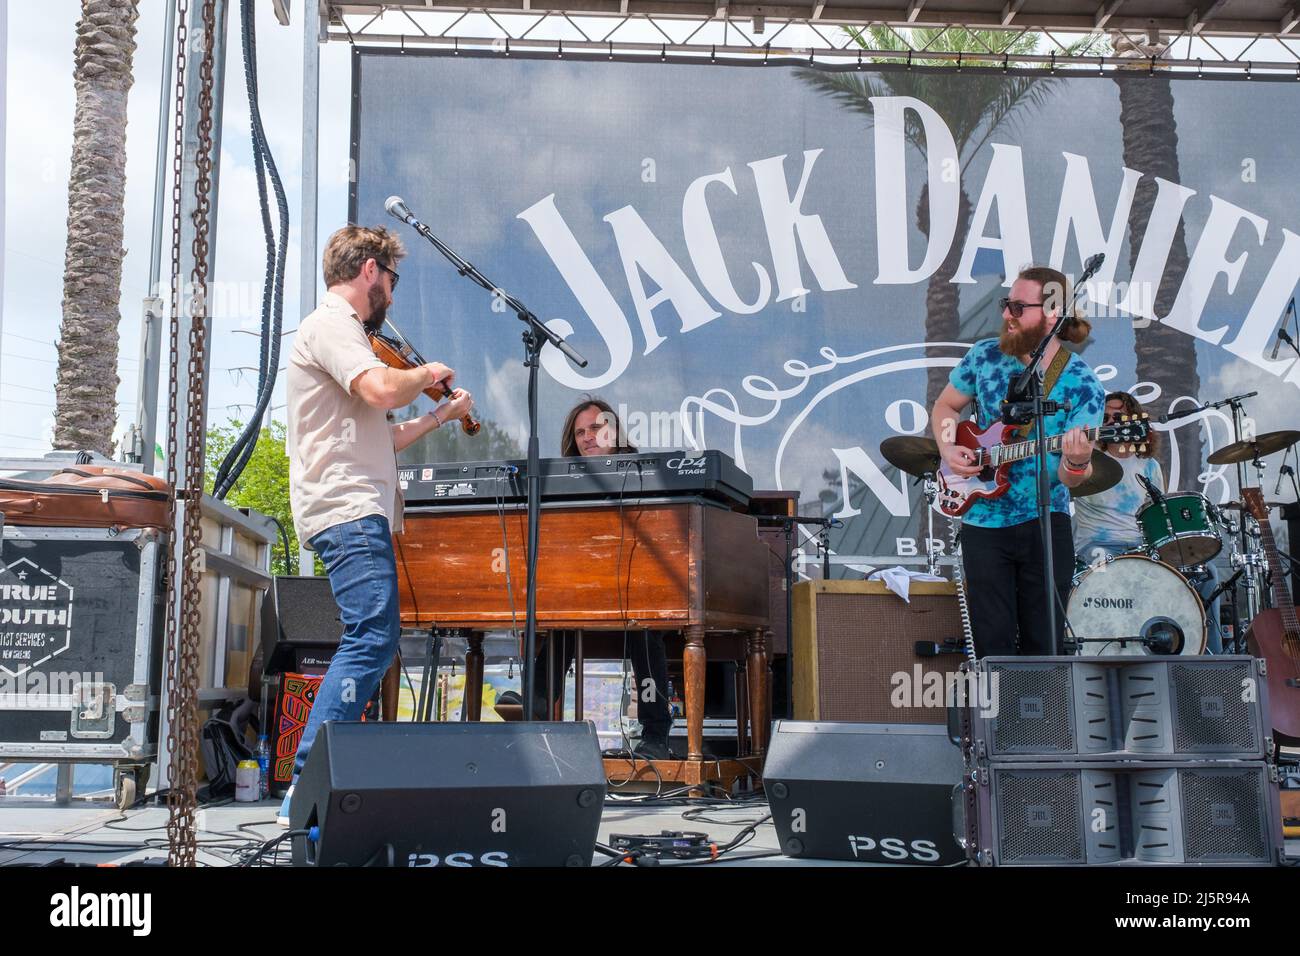 NEW ORLEANS, LA, USA - APRIL 21, 2022: Dave Jordan and the NIA jamming at the Jack Daniel's Stage at the French Quarter Festival (a free festival) Stock Photo